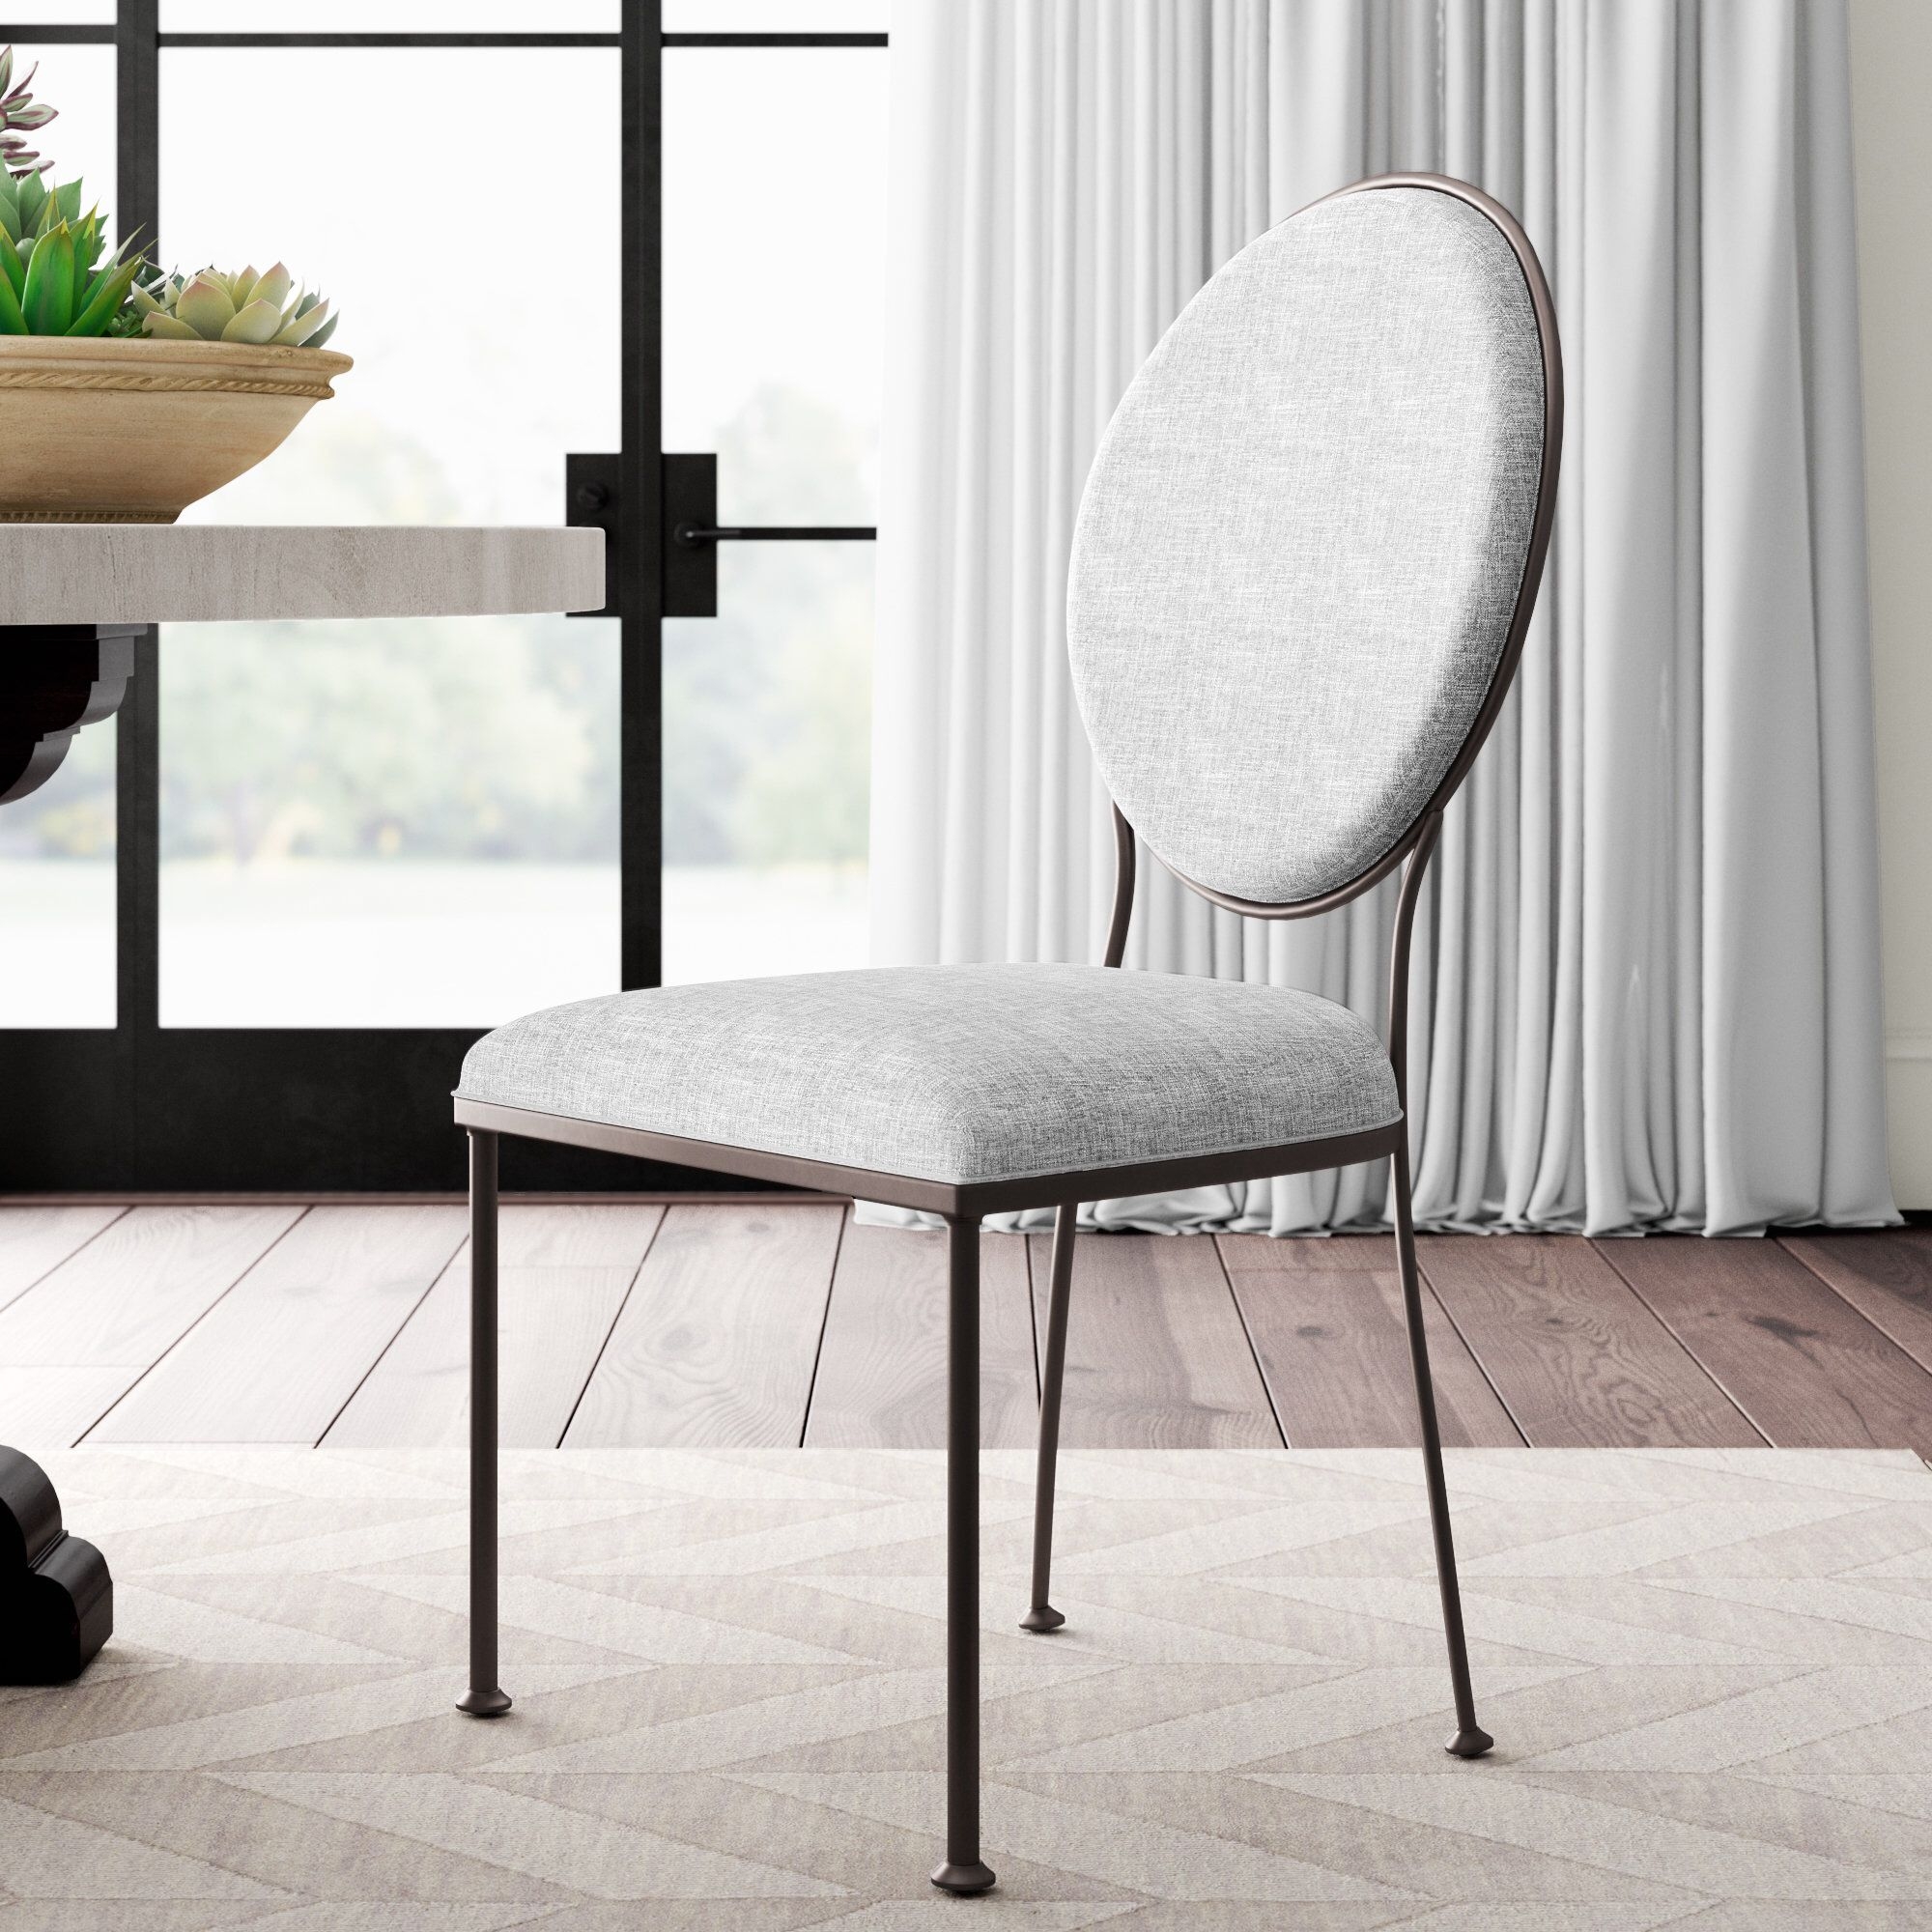 Round Back Dining Chairs You Ll Love In 2021 Visualhunt